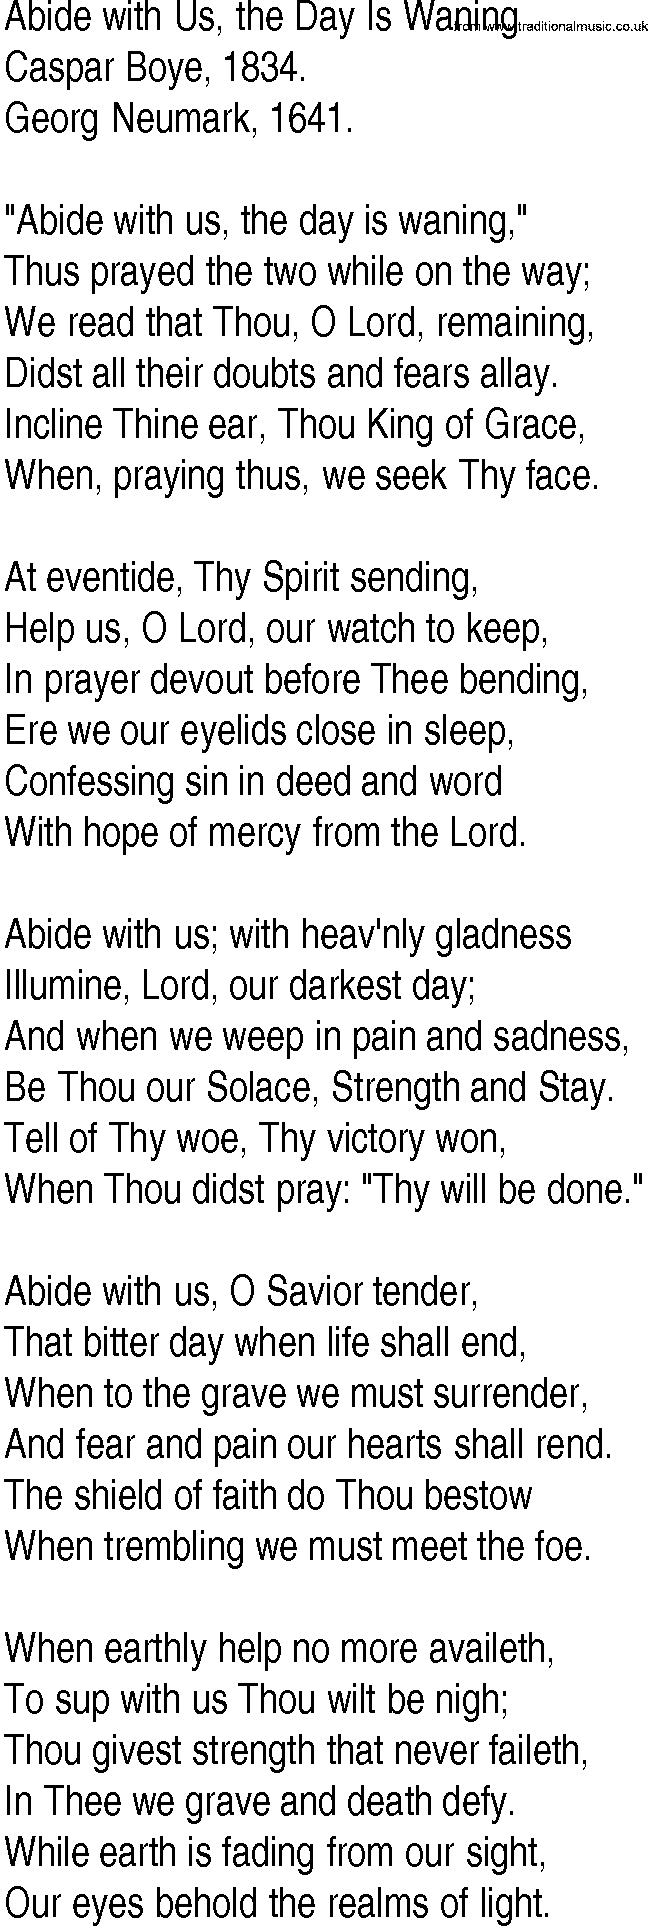 Hymn and Gospel Song: Abide with Us, the Day Is Waning by Caspar Boye lyrics